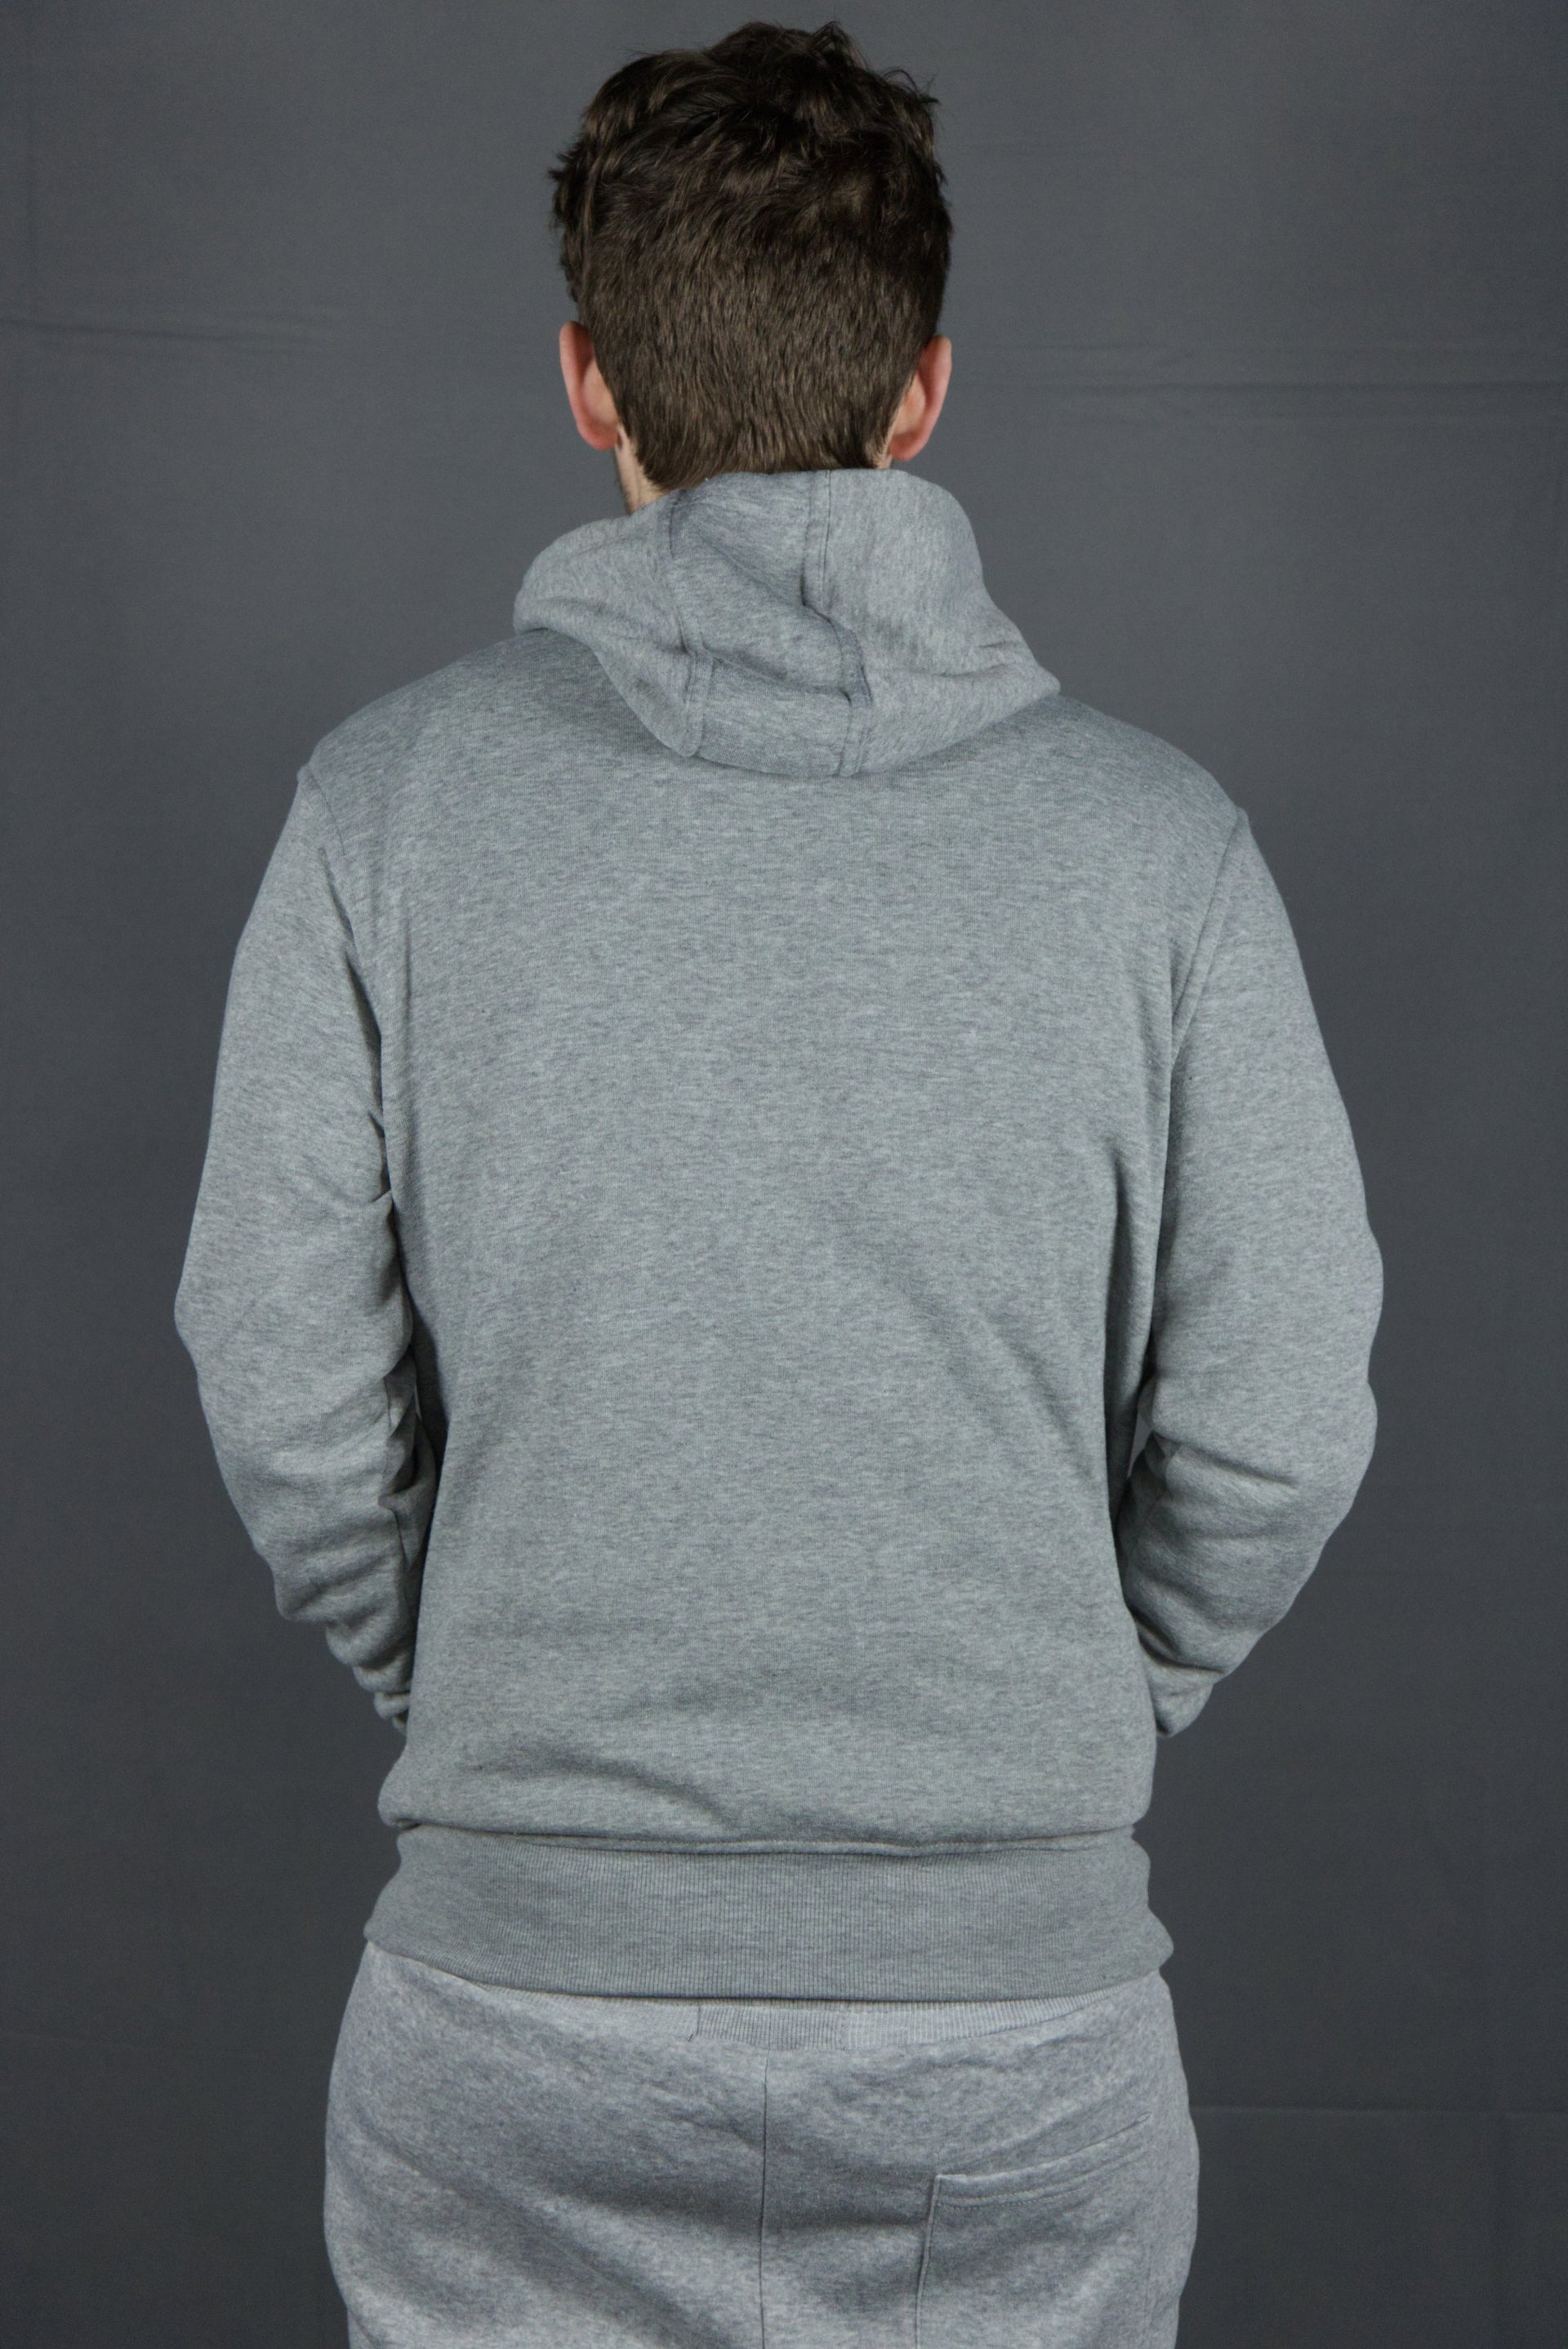 The three panel construction of the hood for the classic fleece heather grey men's basic hooded sweatshirt allows for it to sit comfortably on the wearer, whether worn up or down